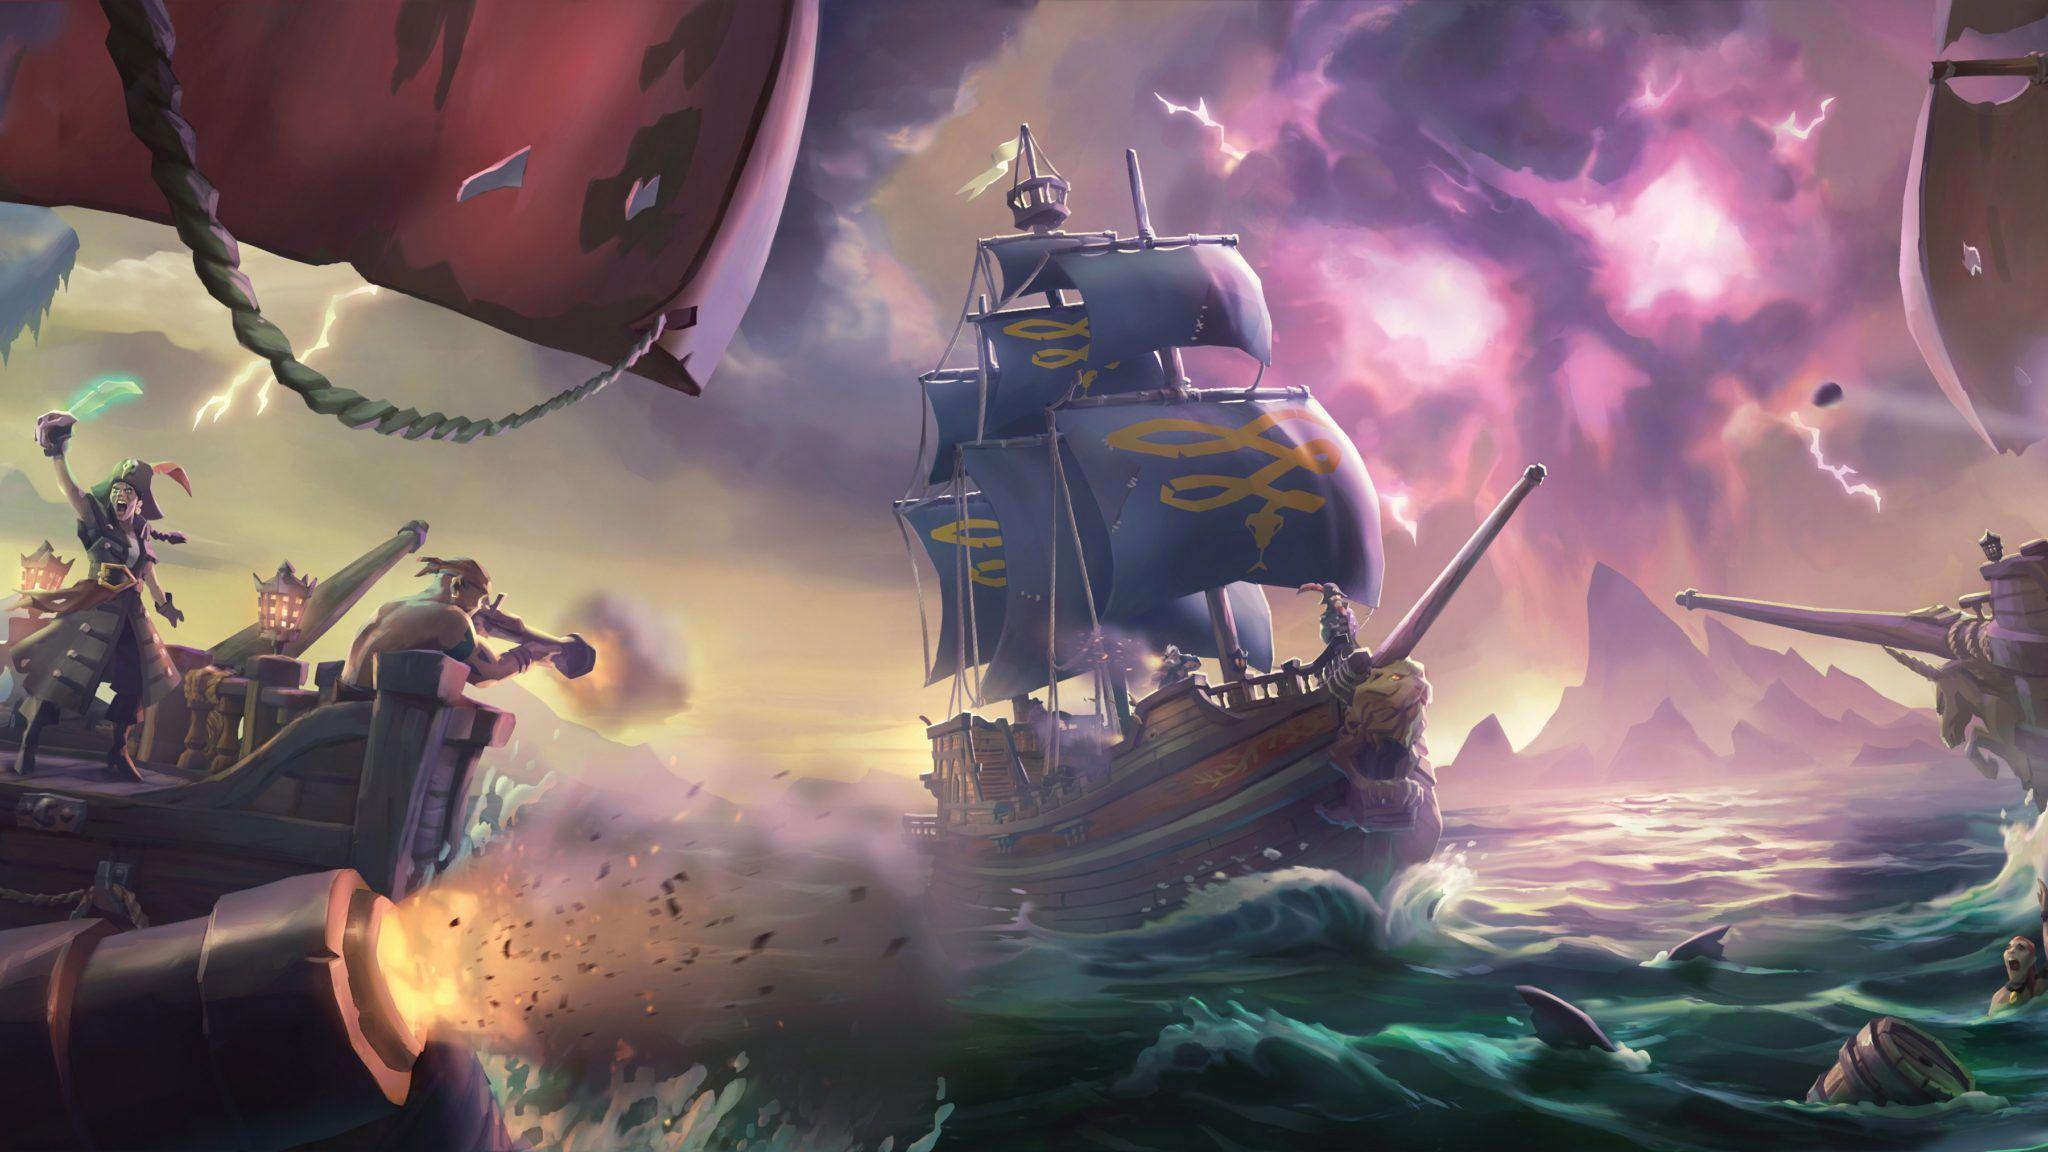 Sea of Thieves Video Game Desktop Wallpapers 62599 2048x1152 px